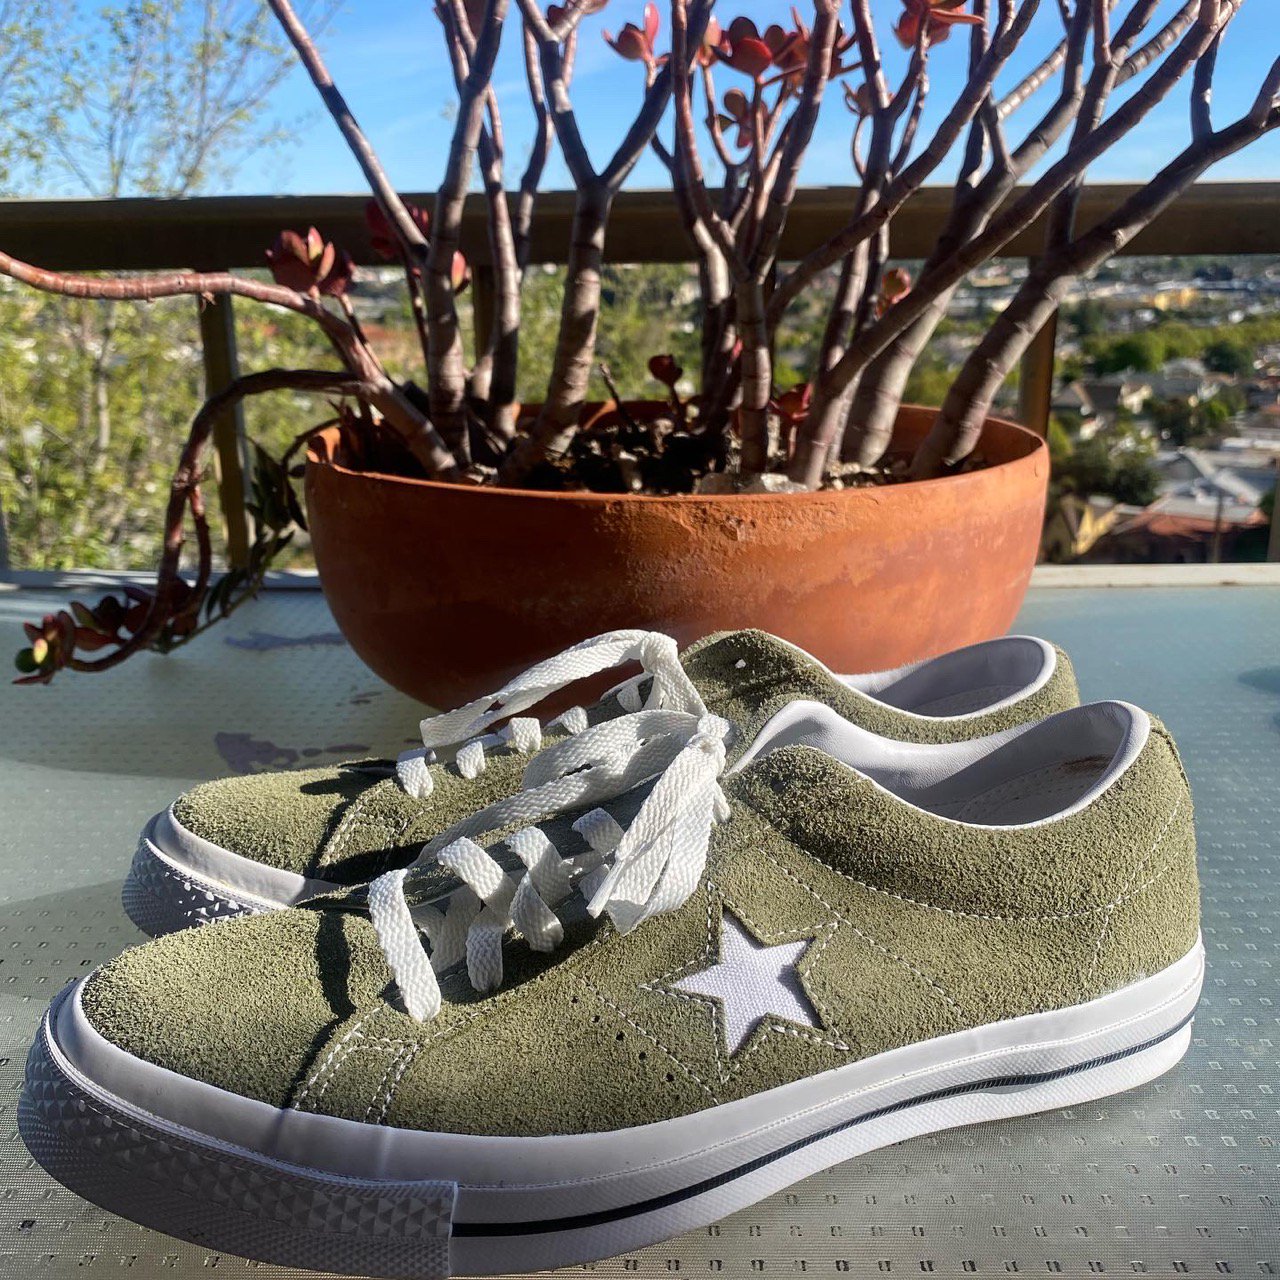 Converse One Star US 9 used -good condition- 